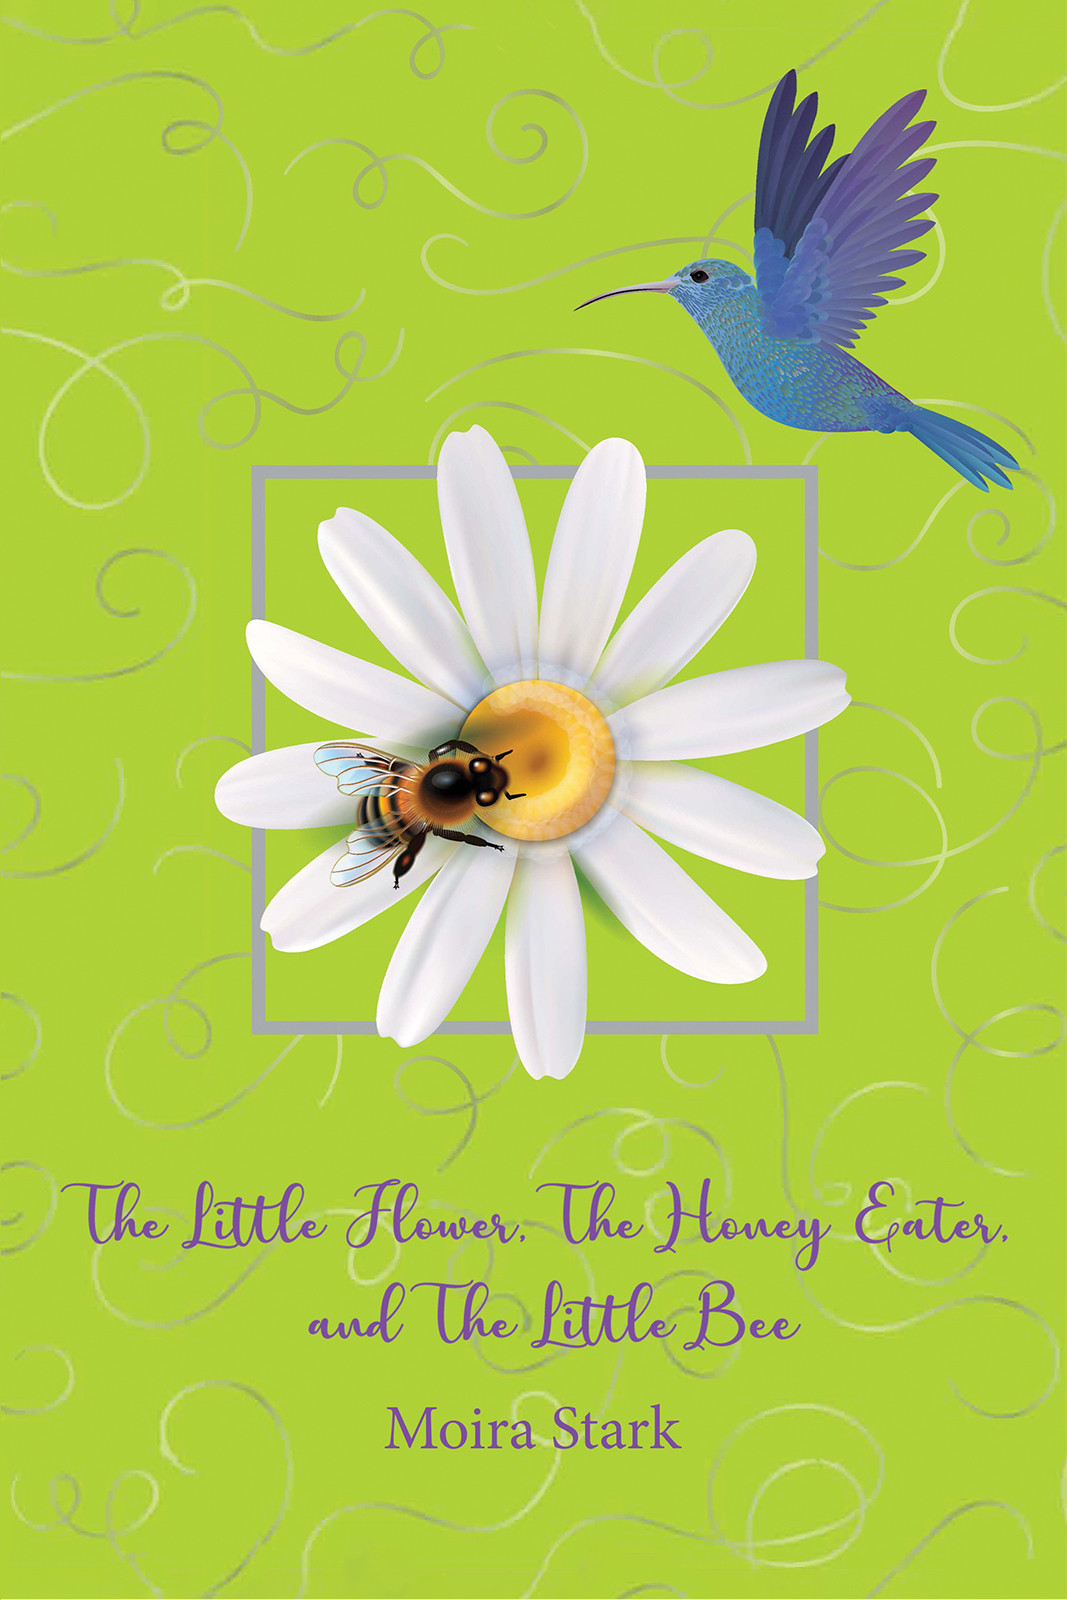 The Little Flower, The Honey Eater, and The Little Bee-bookcover